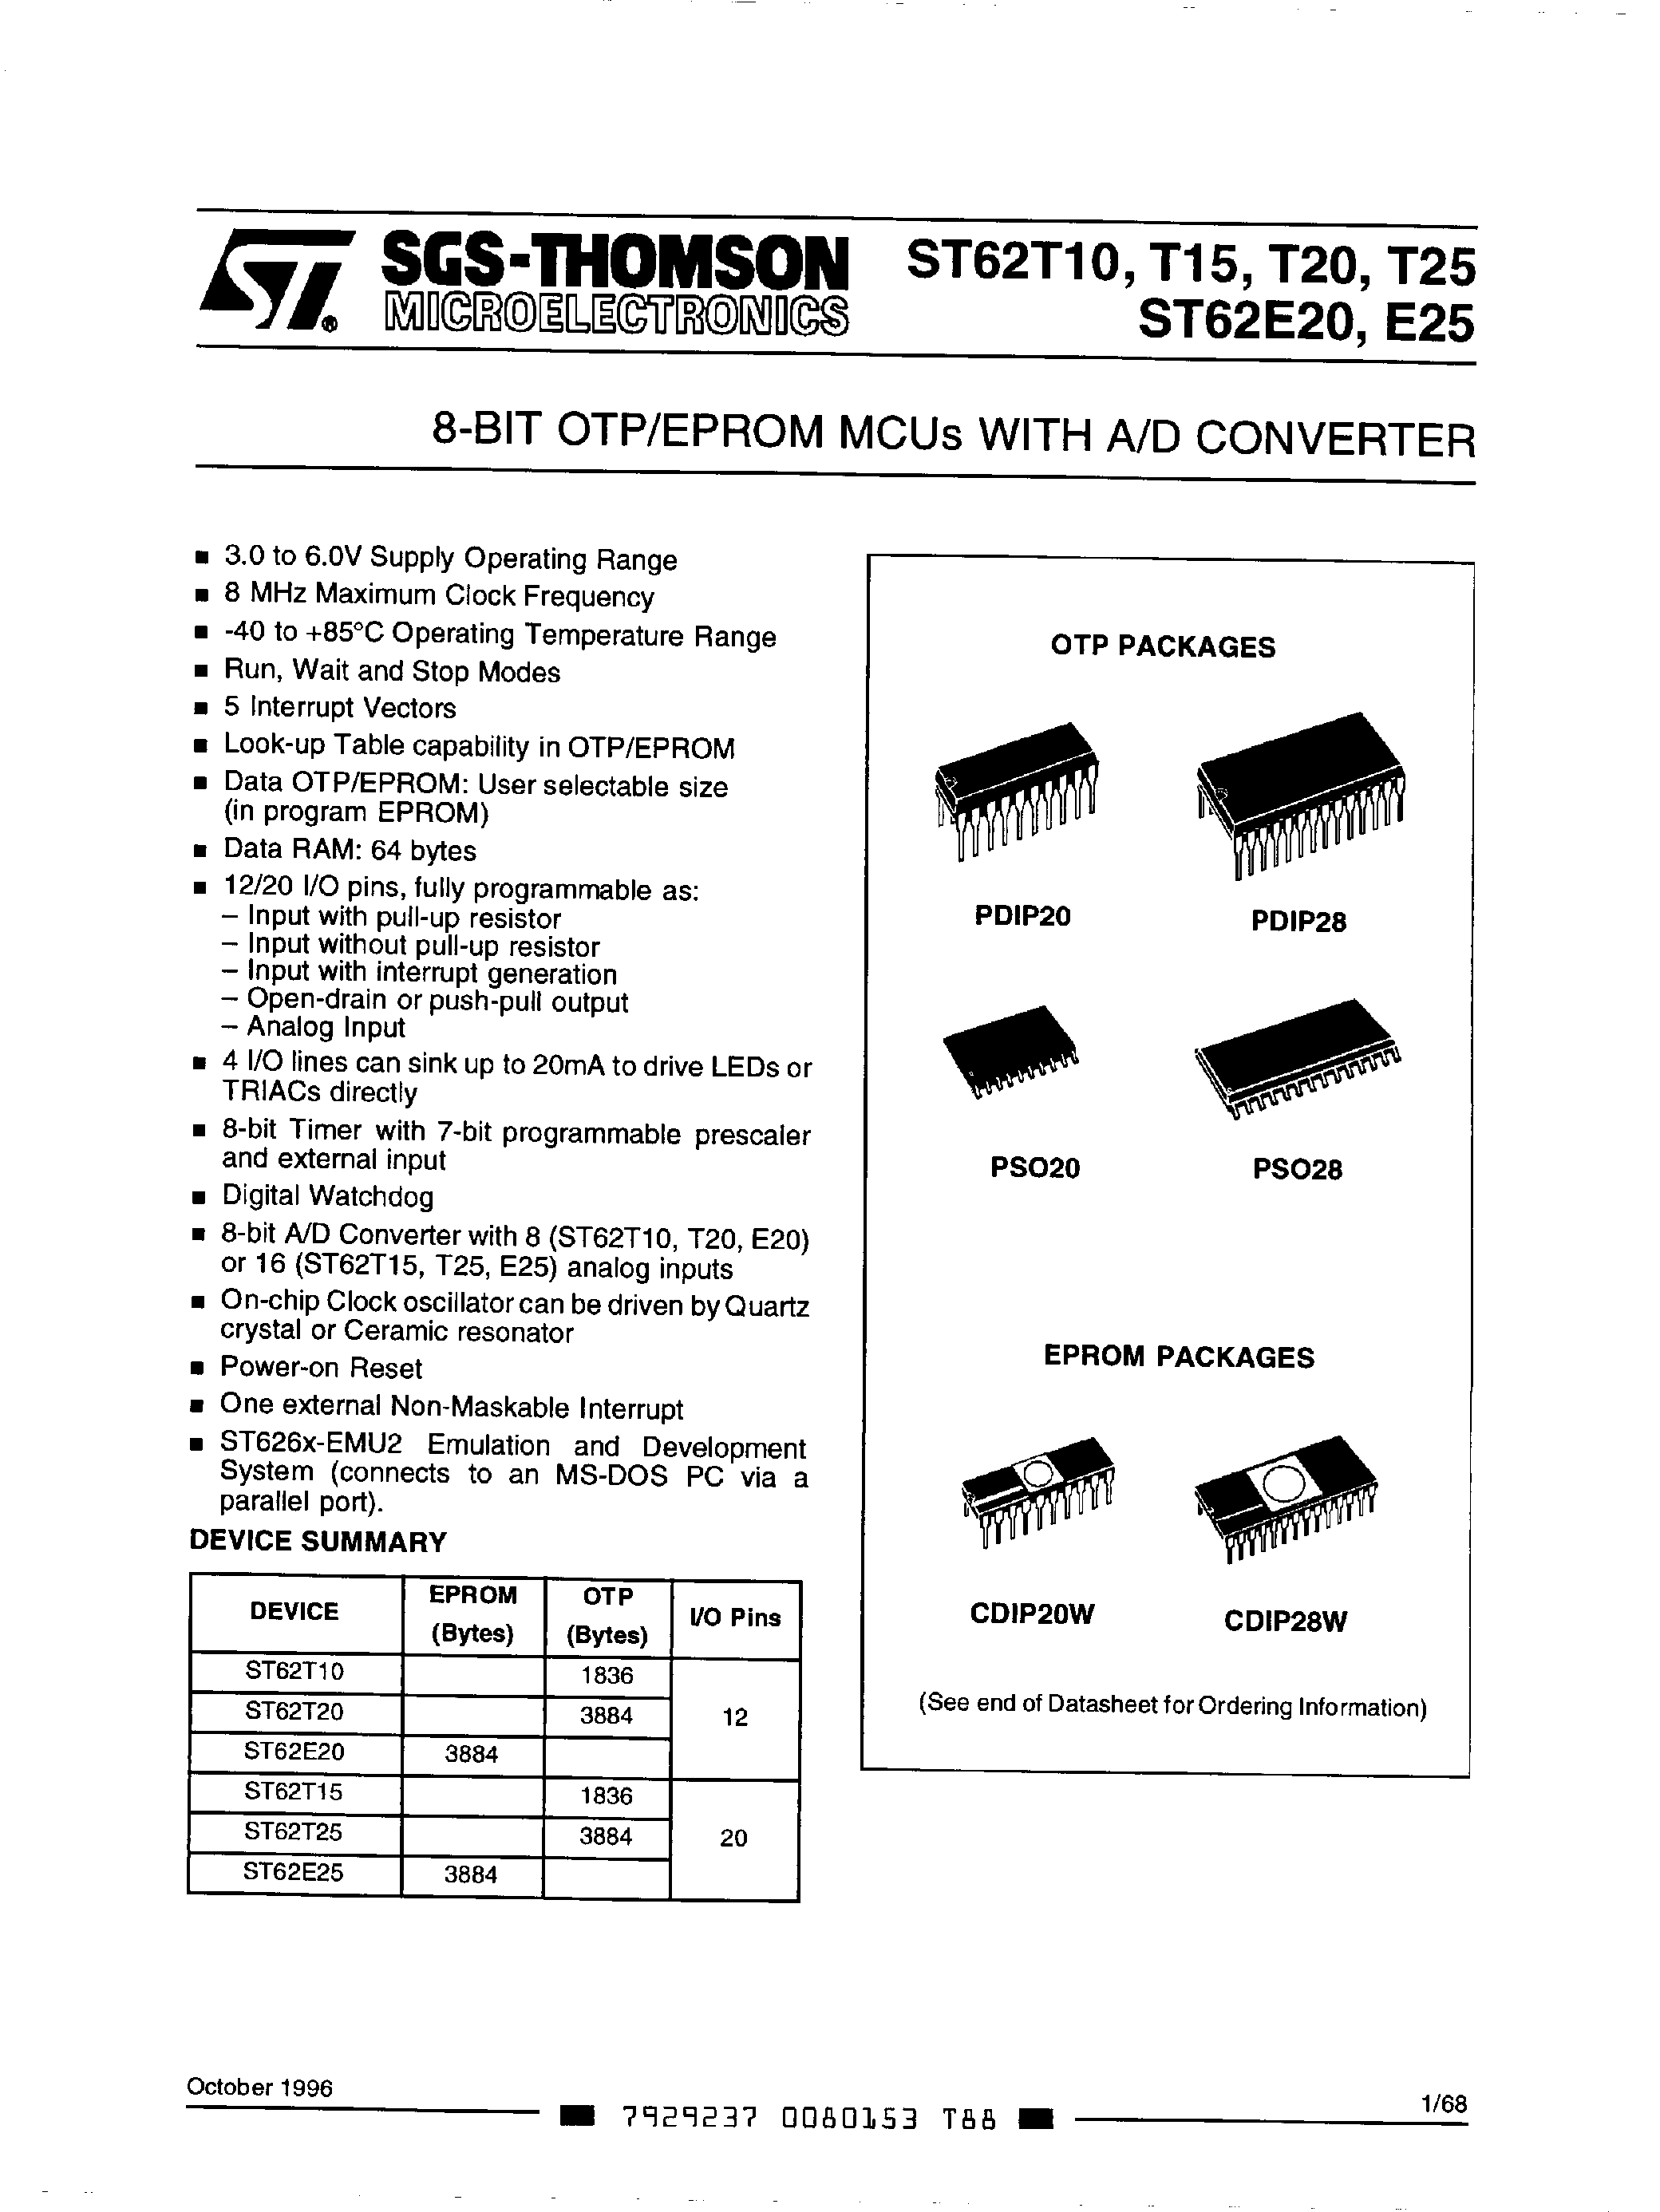 Datasheet ST62E20 - (ST62T10 - ST62E25) 8-BIT OTP/EPROM MCUs WITH A/D CONVERTER page 1